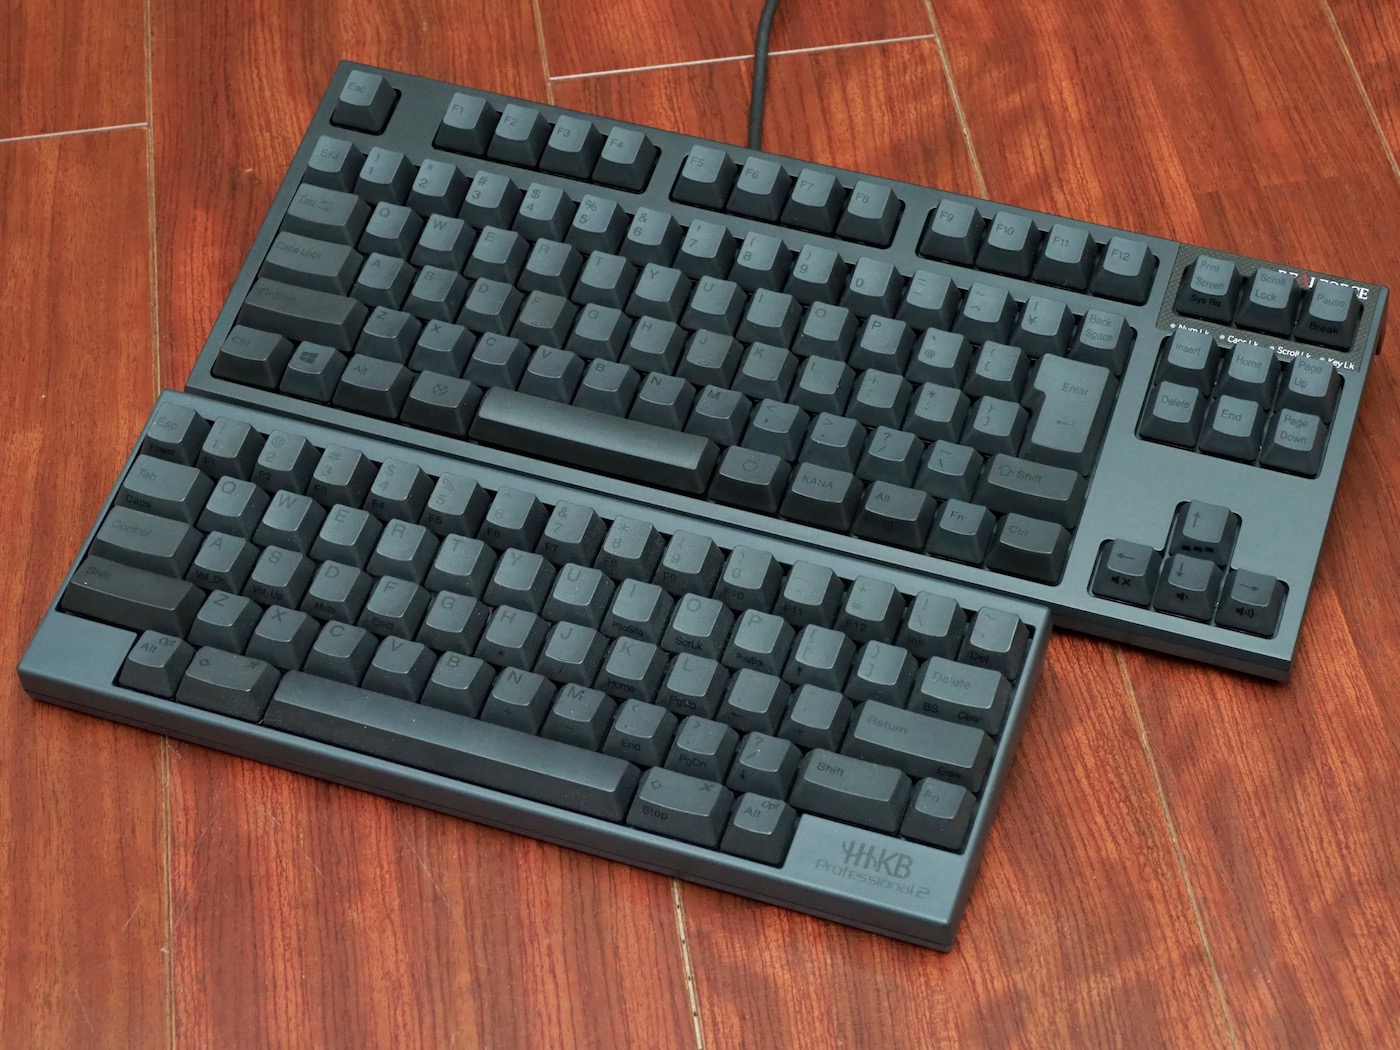 Realforce r2 pfu limited edition 00015